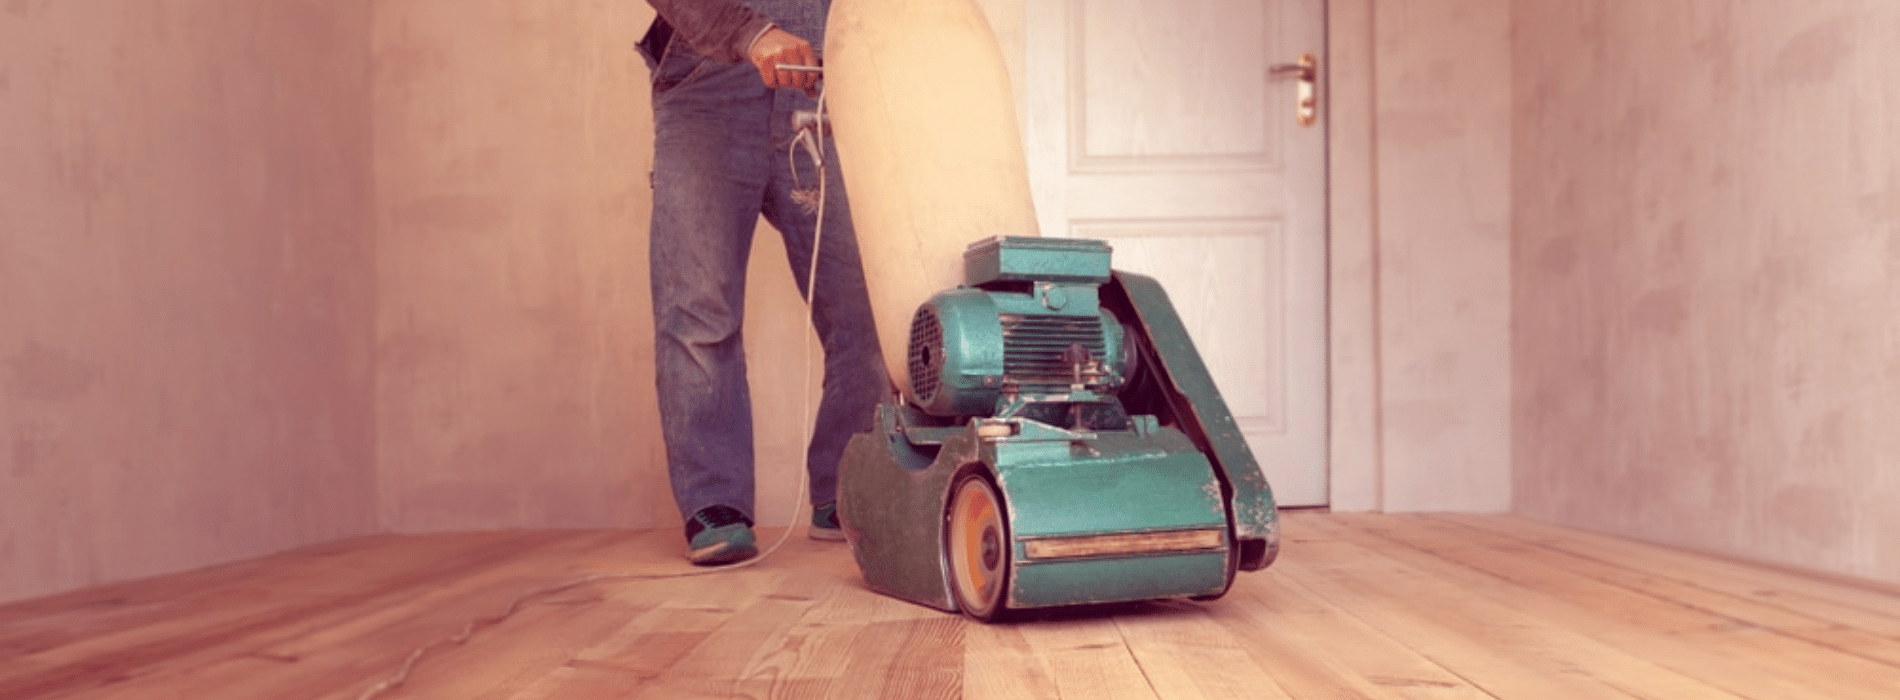 In Kilburn, NW6, Mr Sander® are using a Bona Belt sander (2.2 kW, 230V) to sand a parquet floor. The sander is connected to a dust extraction system with a HEPA filter (50 Hz/60 Hz) for a clean and efficient result.